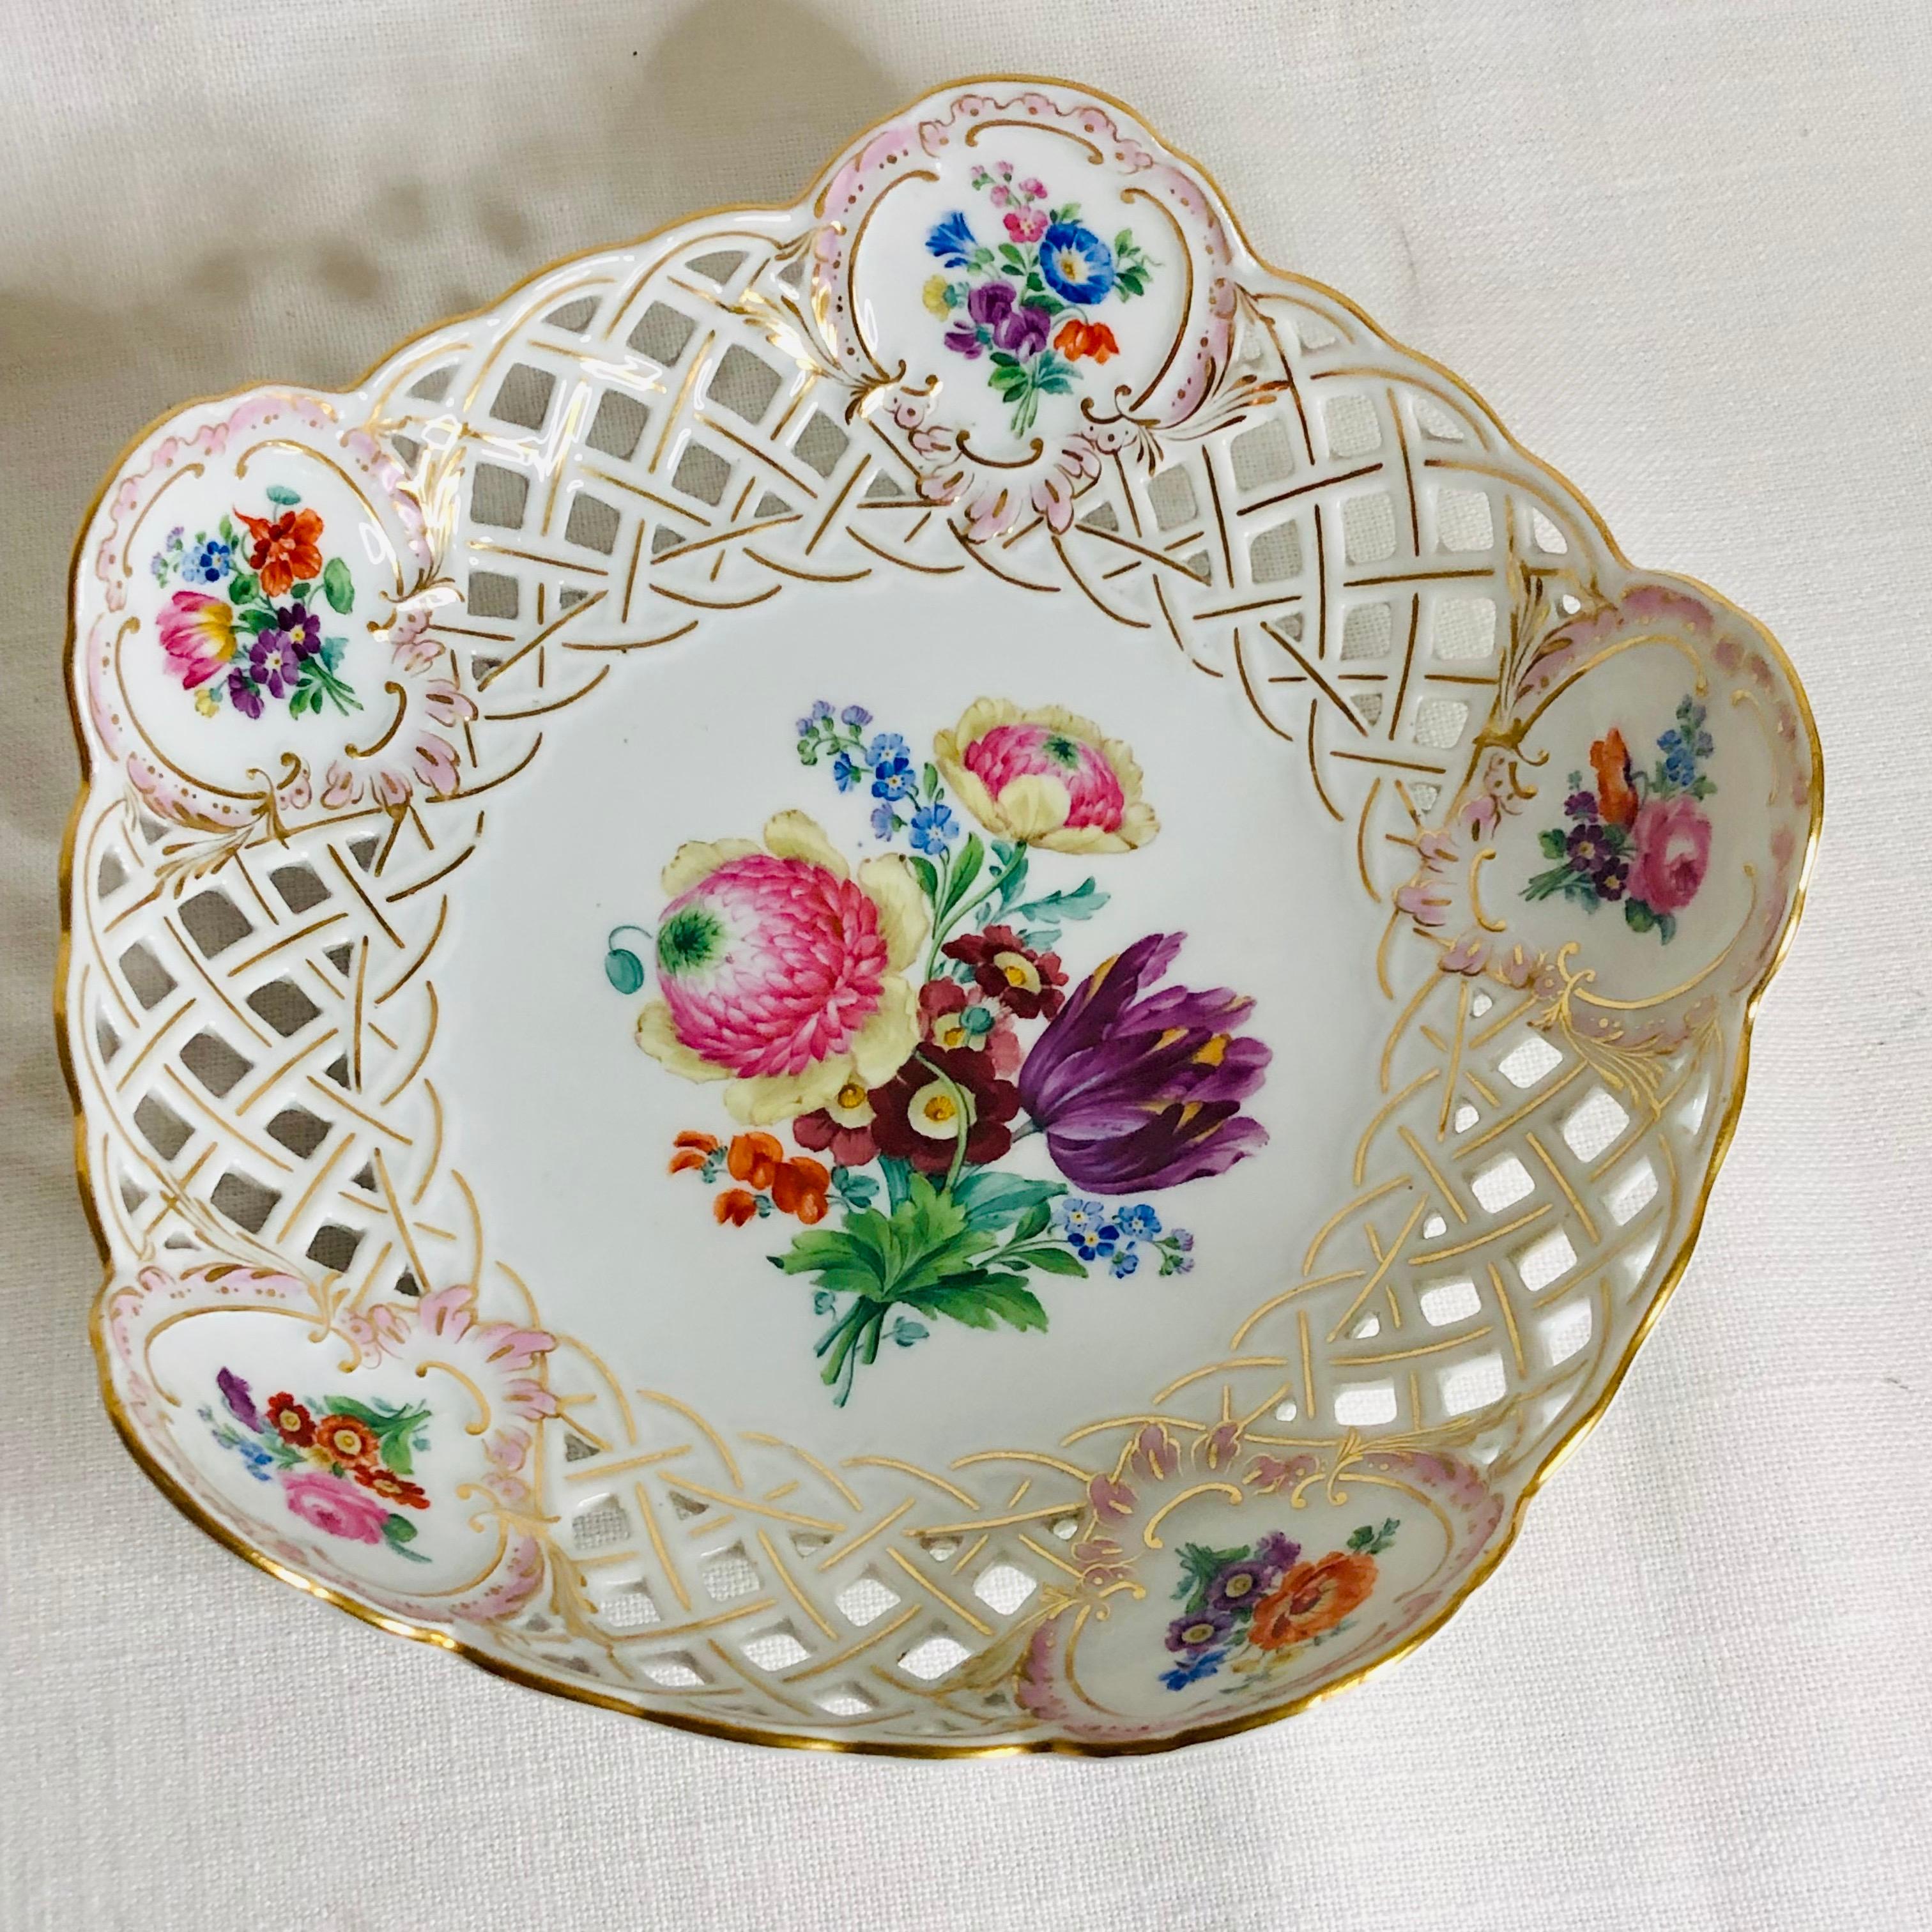 I am offering you this beautiful Meissen reticulated and fluted bowl. It has a bright and colorful large flower bouquet in the center of the bowl with a stunning purple tulip surrounded by other beautiful flowers. Inside the fluted gilded border,